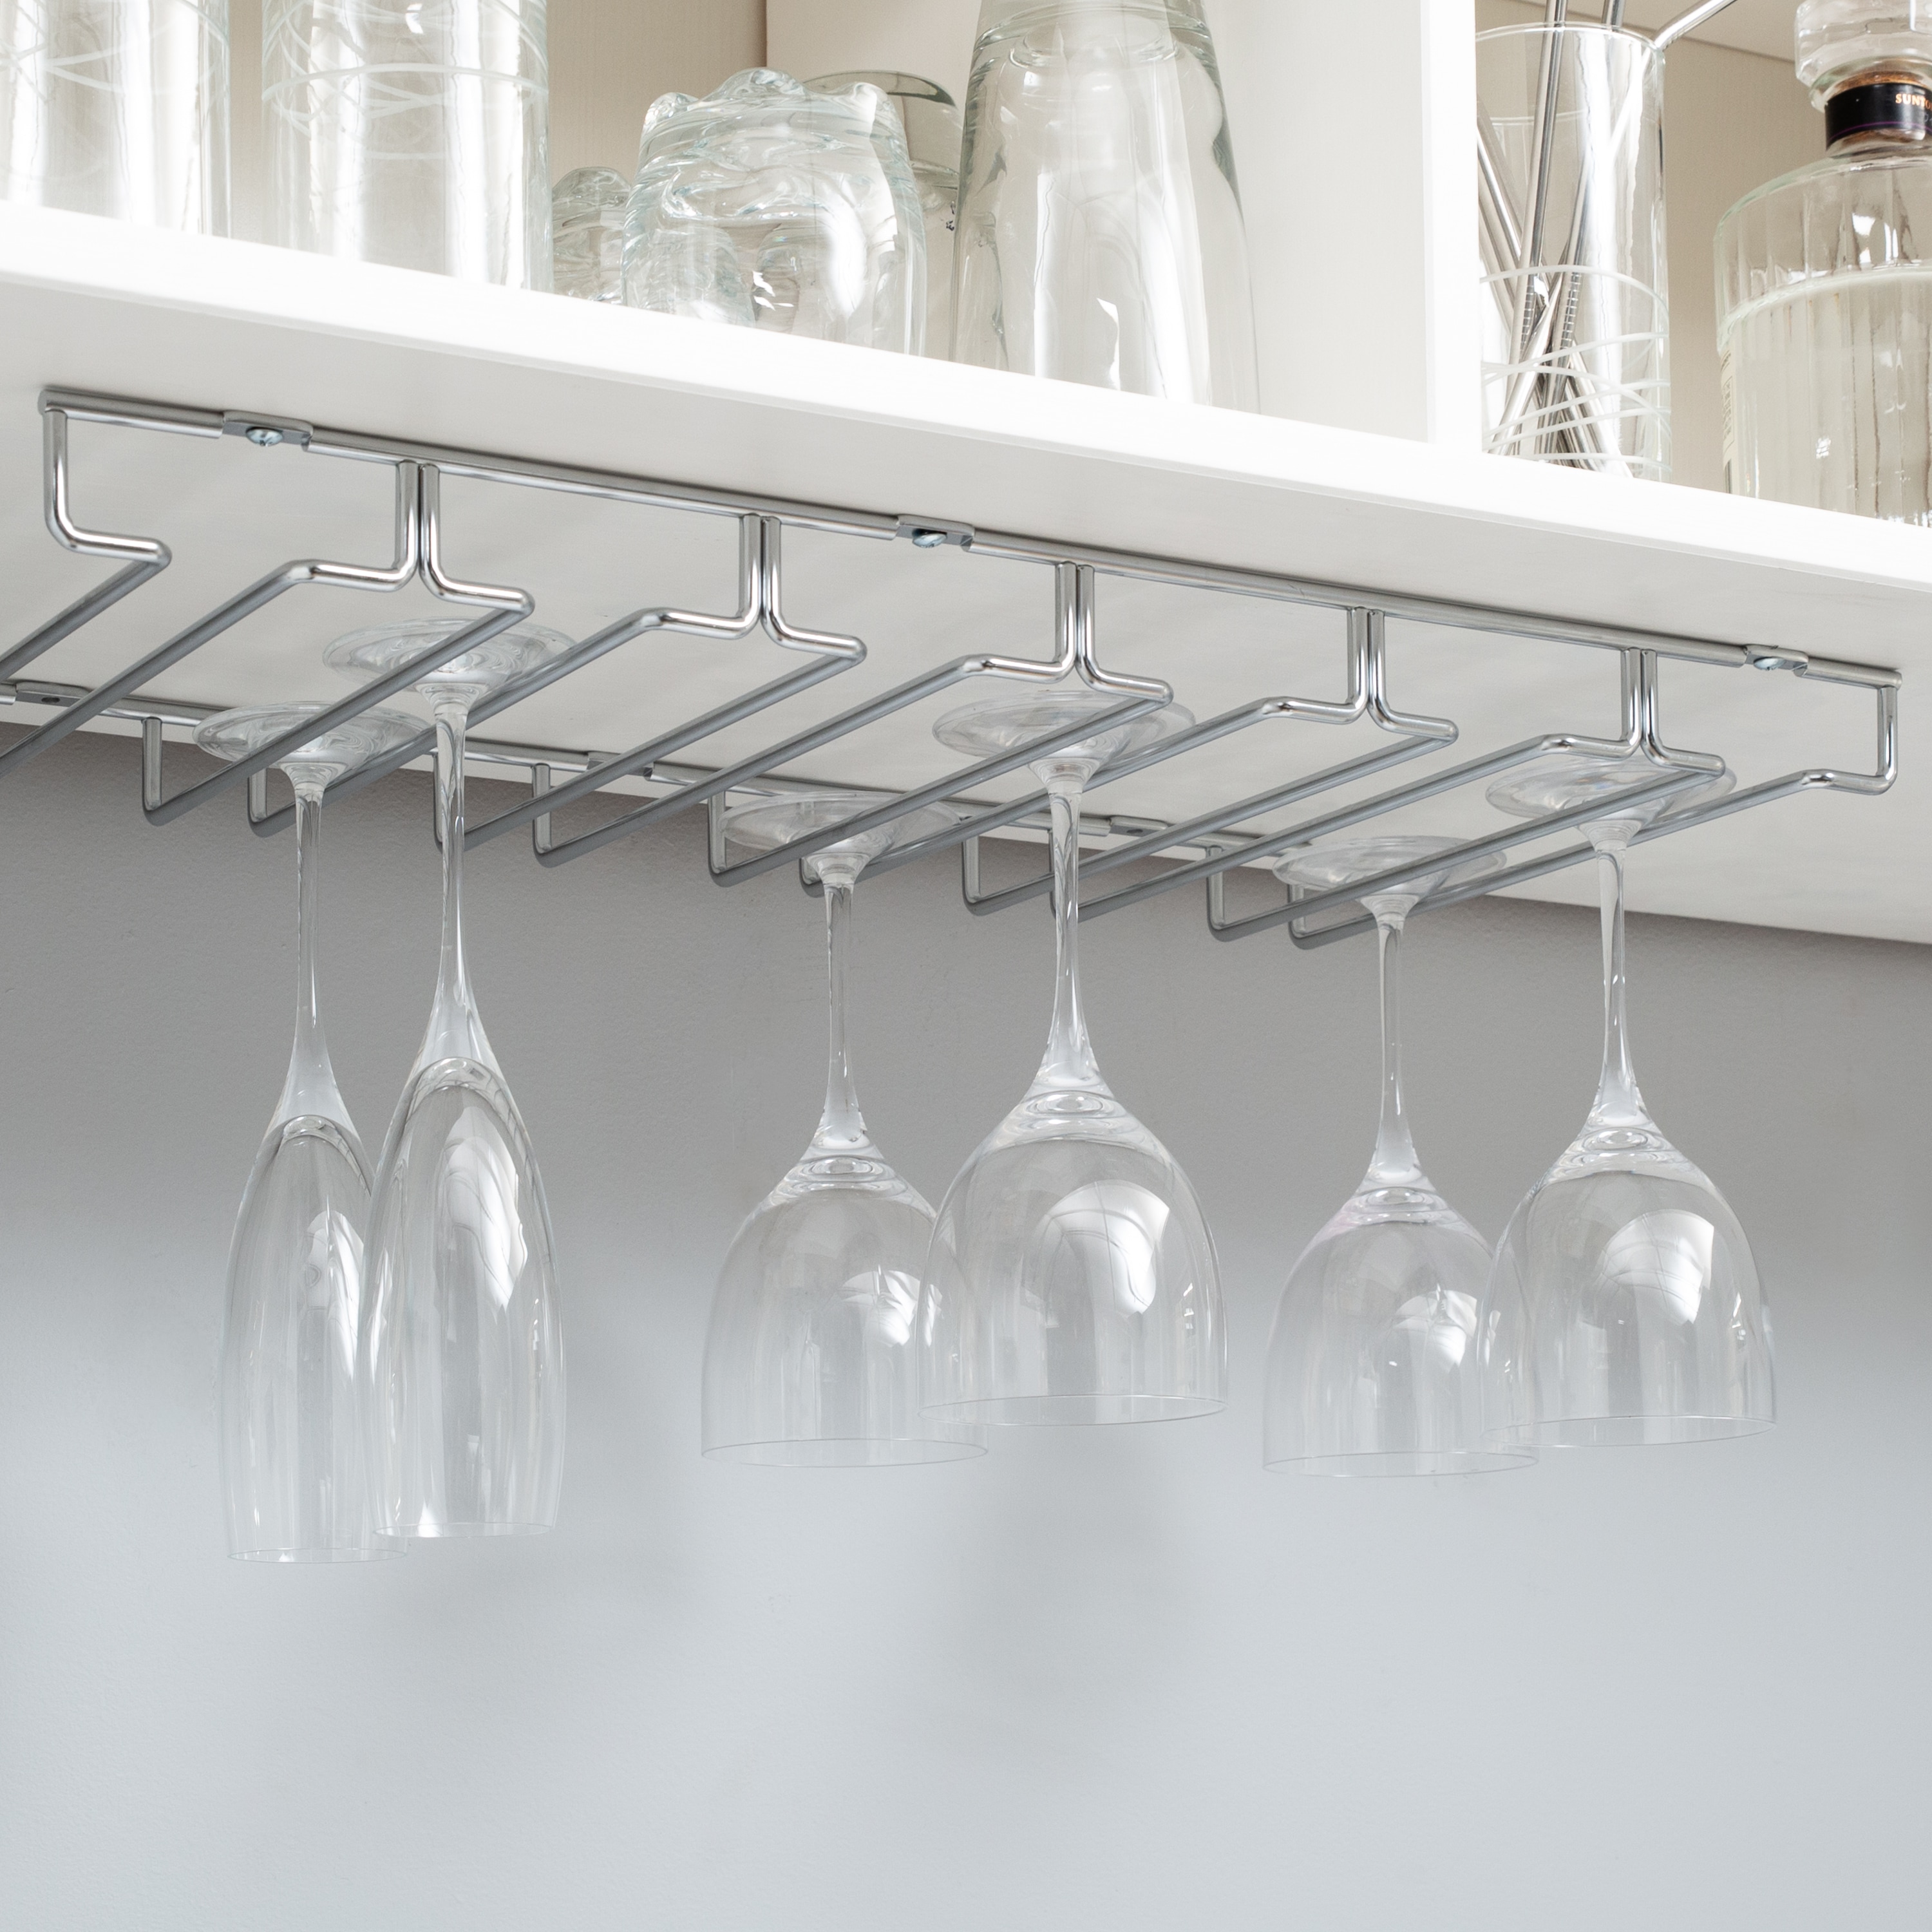 Organize It All 20 In W X 1 38 H Tier Cabinet Mount Metal Stemware Holder The Organizers Department At Lowes Com